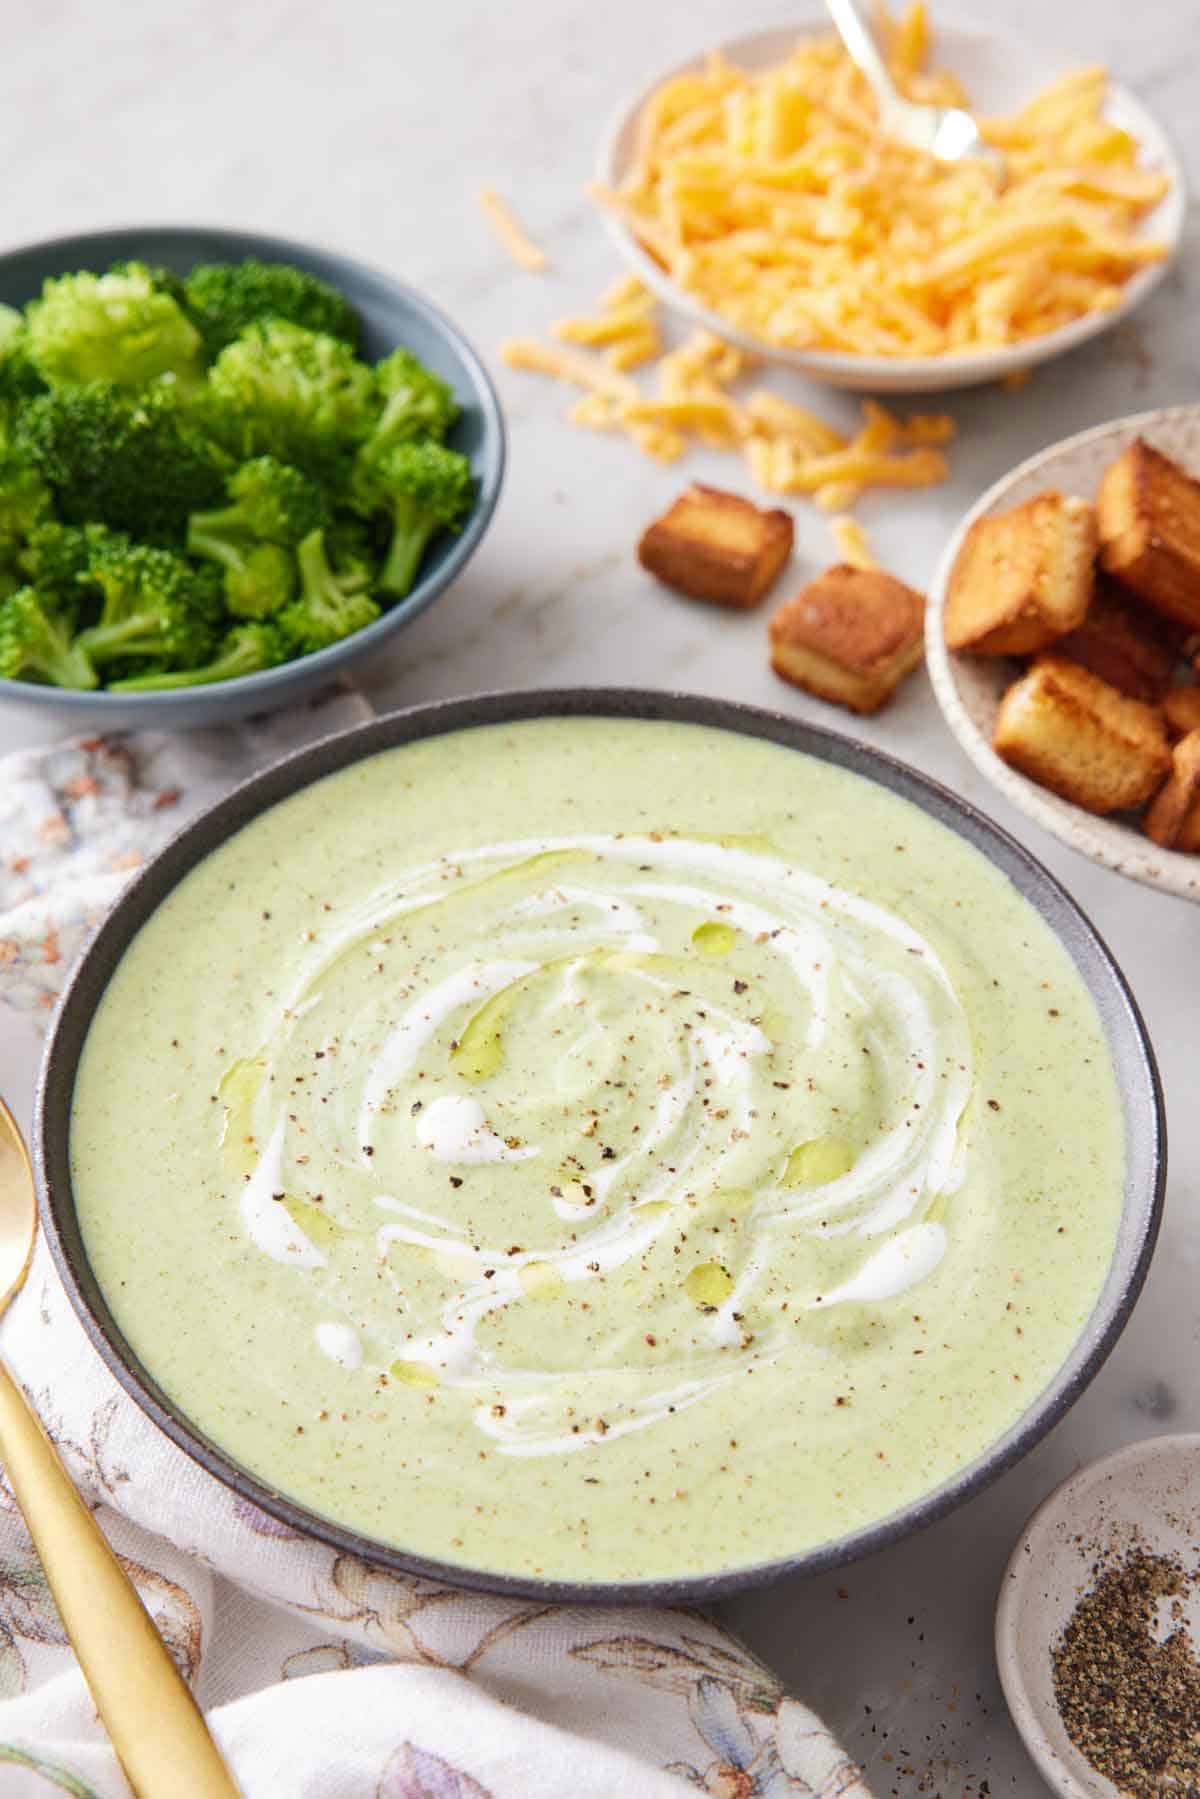 A bowl of cream of broccoli soup with cream swirled on top with pepper. Broccoli, shredded cheese, and croutons in the background.